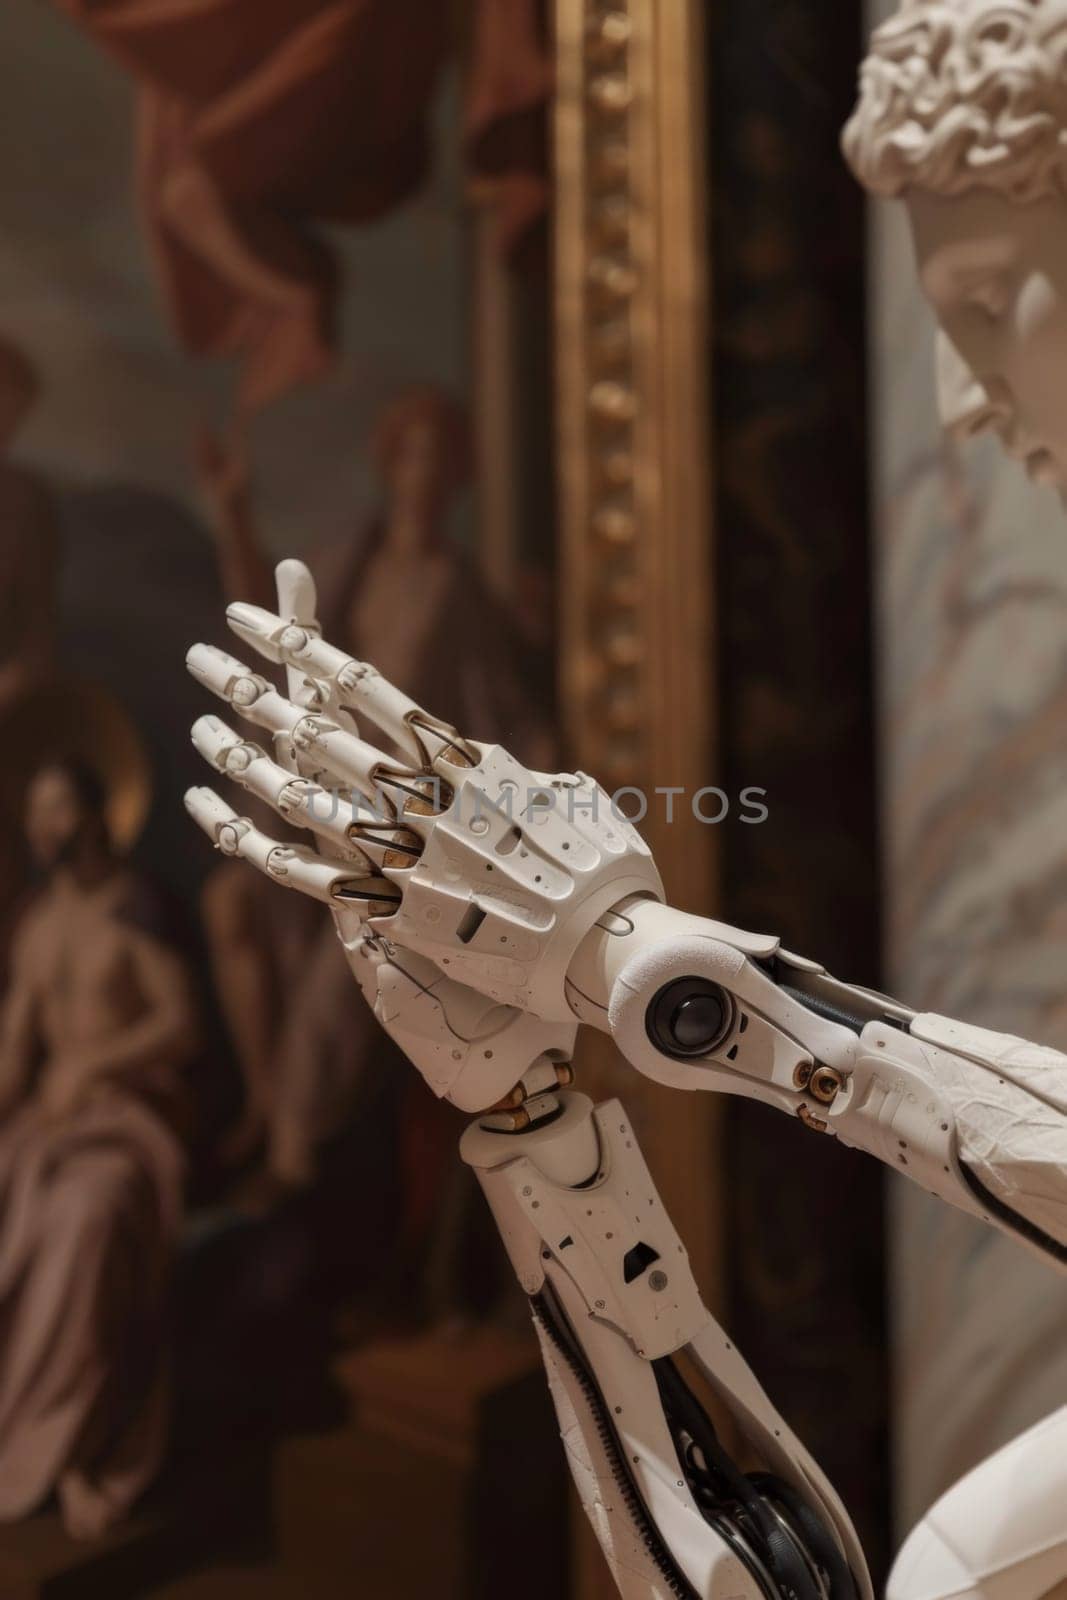 A robot with hands folded in prayer pose next to a painting